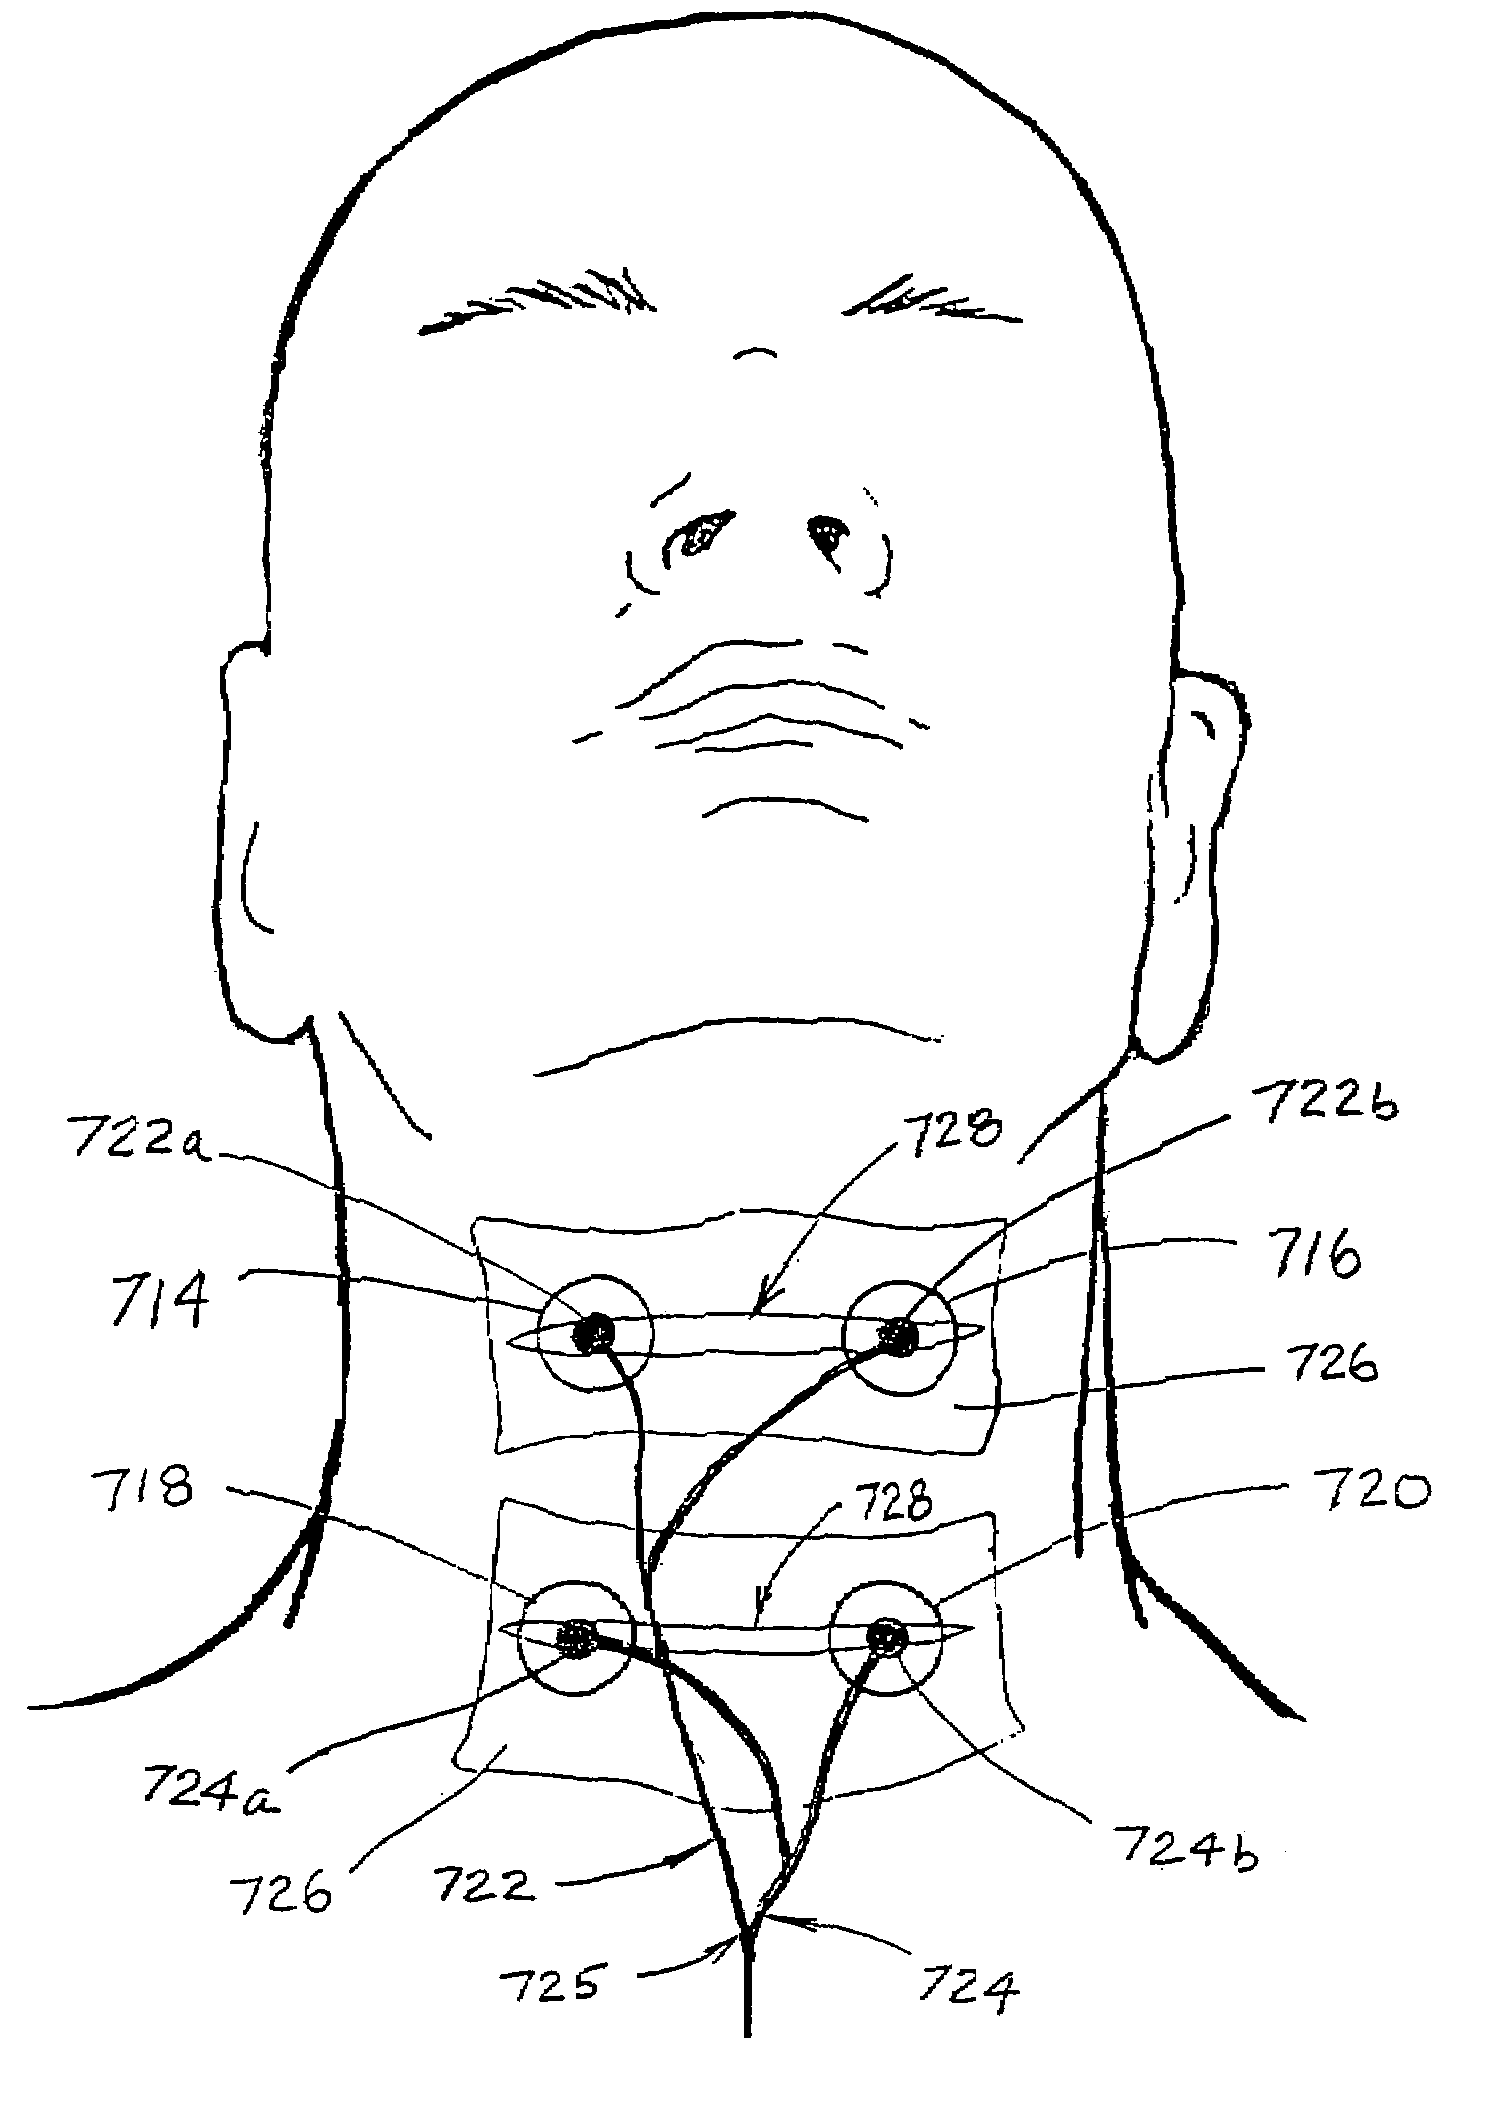 Treatment of oropharyngeal disorders by application of neuromuscular electrical stimulation